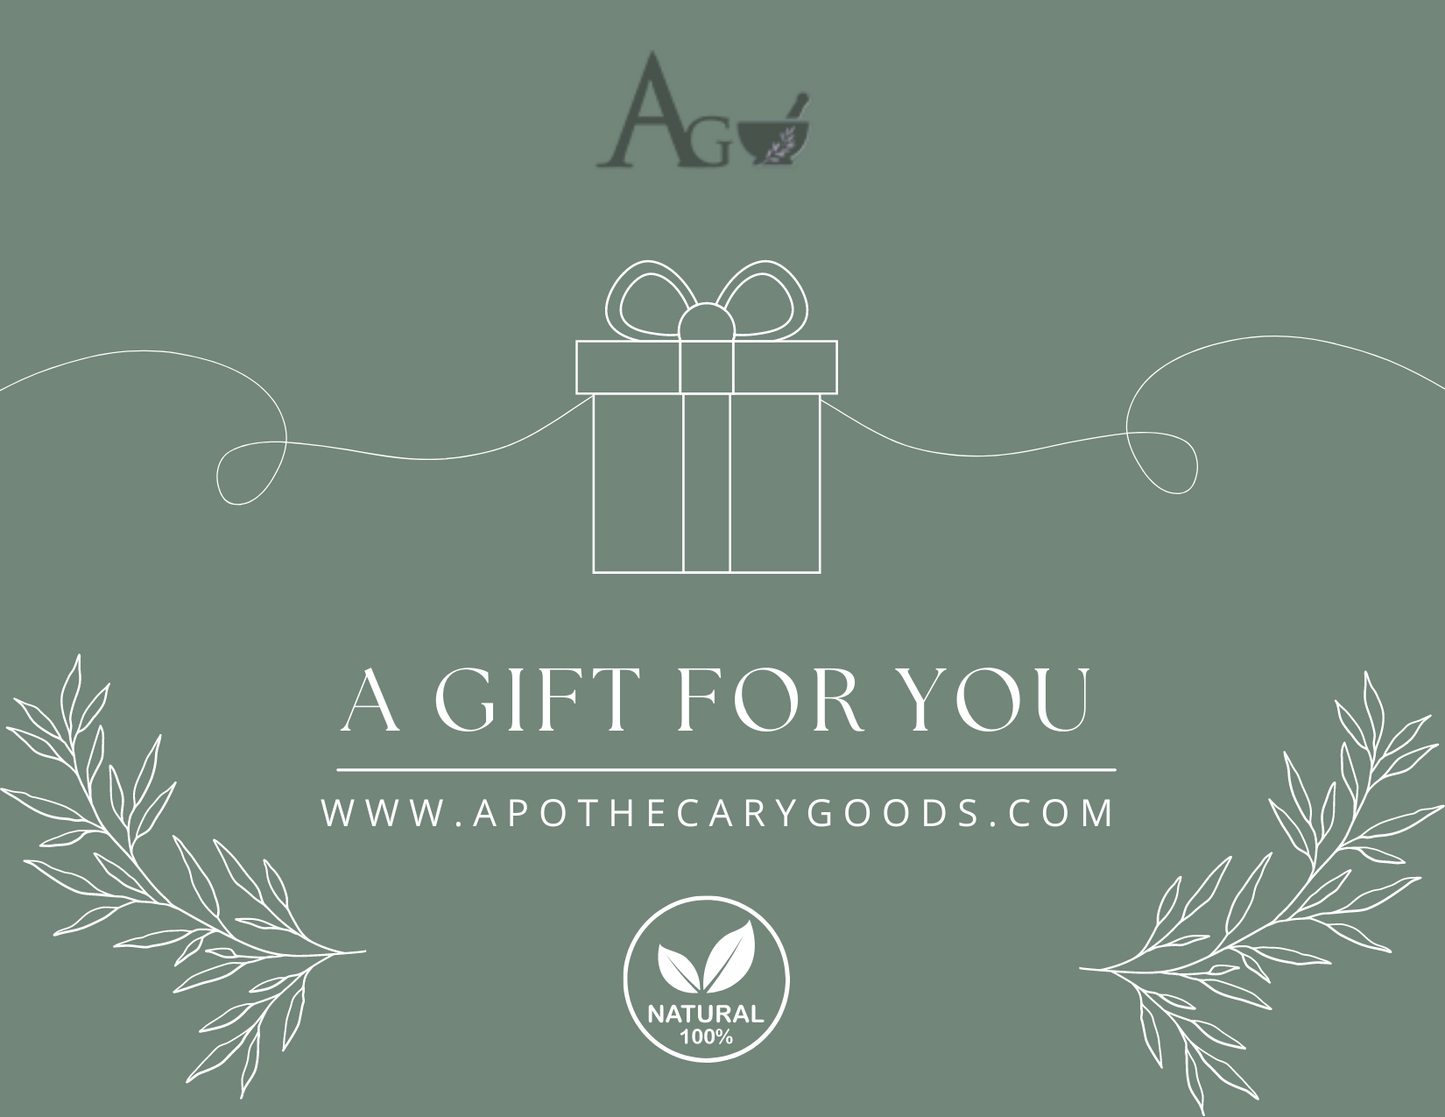 Apothecary Goods Gift card